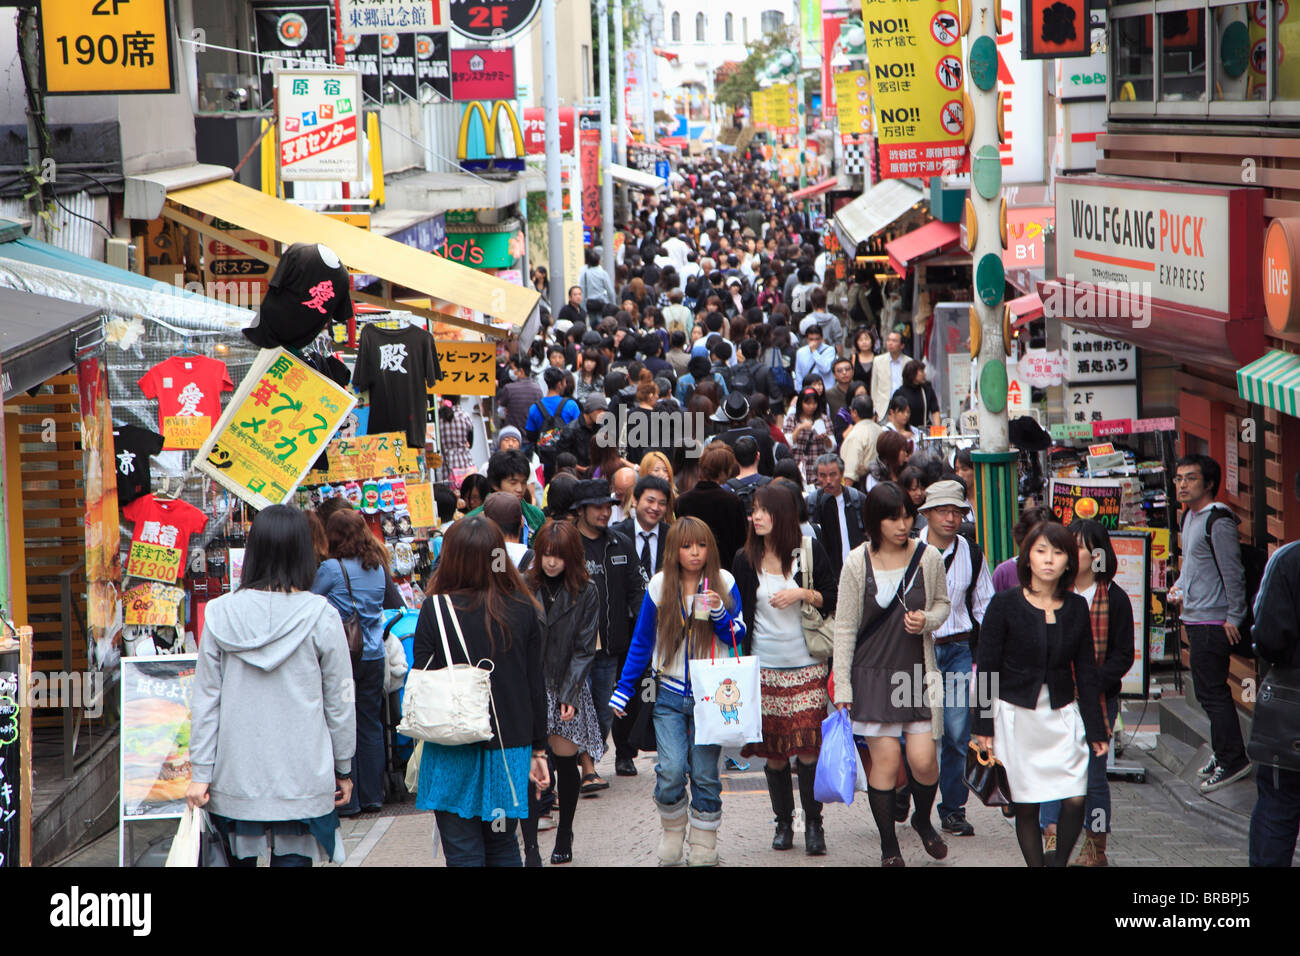 Weekend crowds, Takeshita Dori, a pedestrianised street that is a mecca for youth culture and fashion, Harajuku, Tokyo, Japan Stock Photo